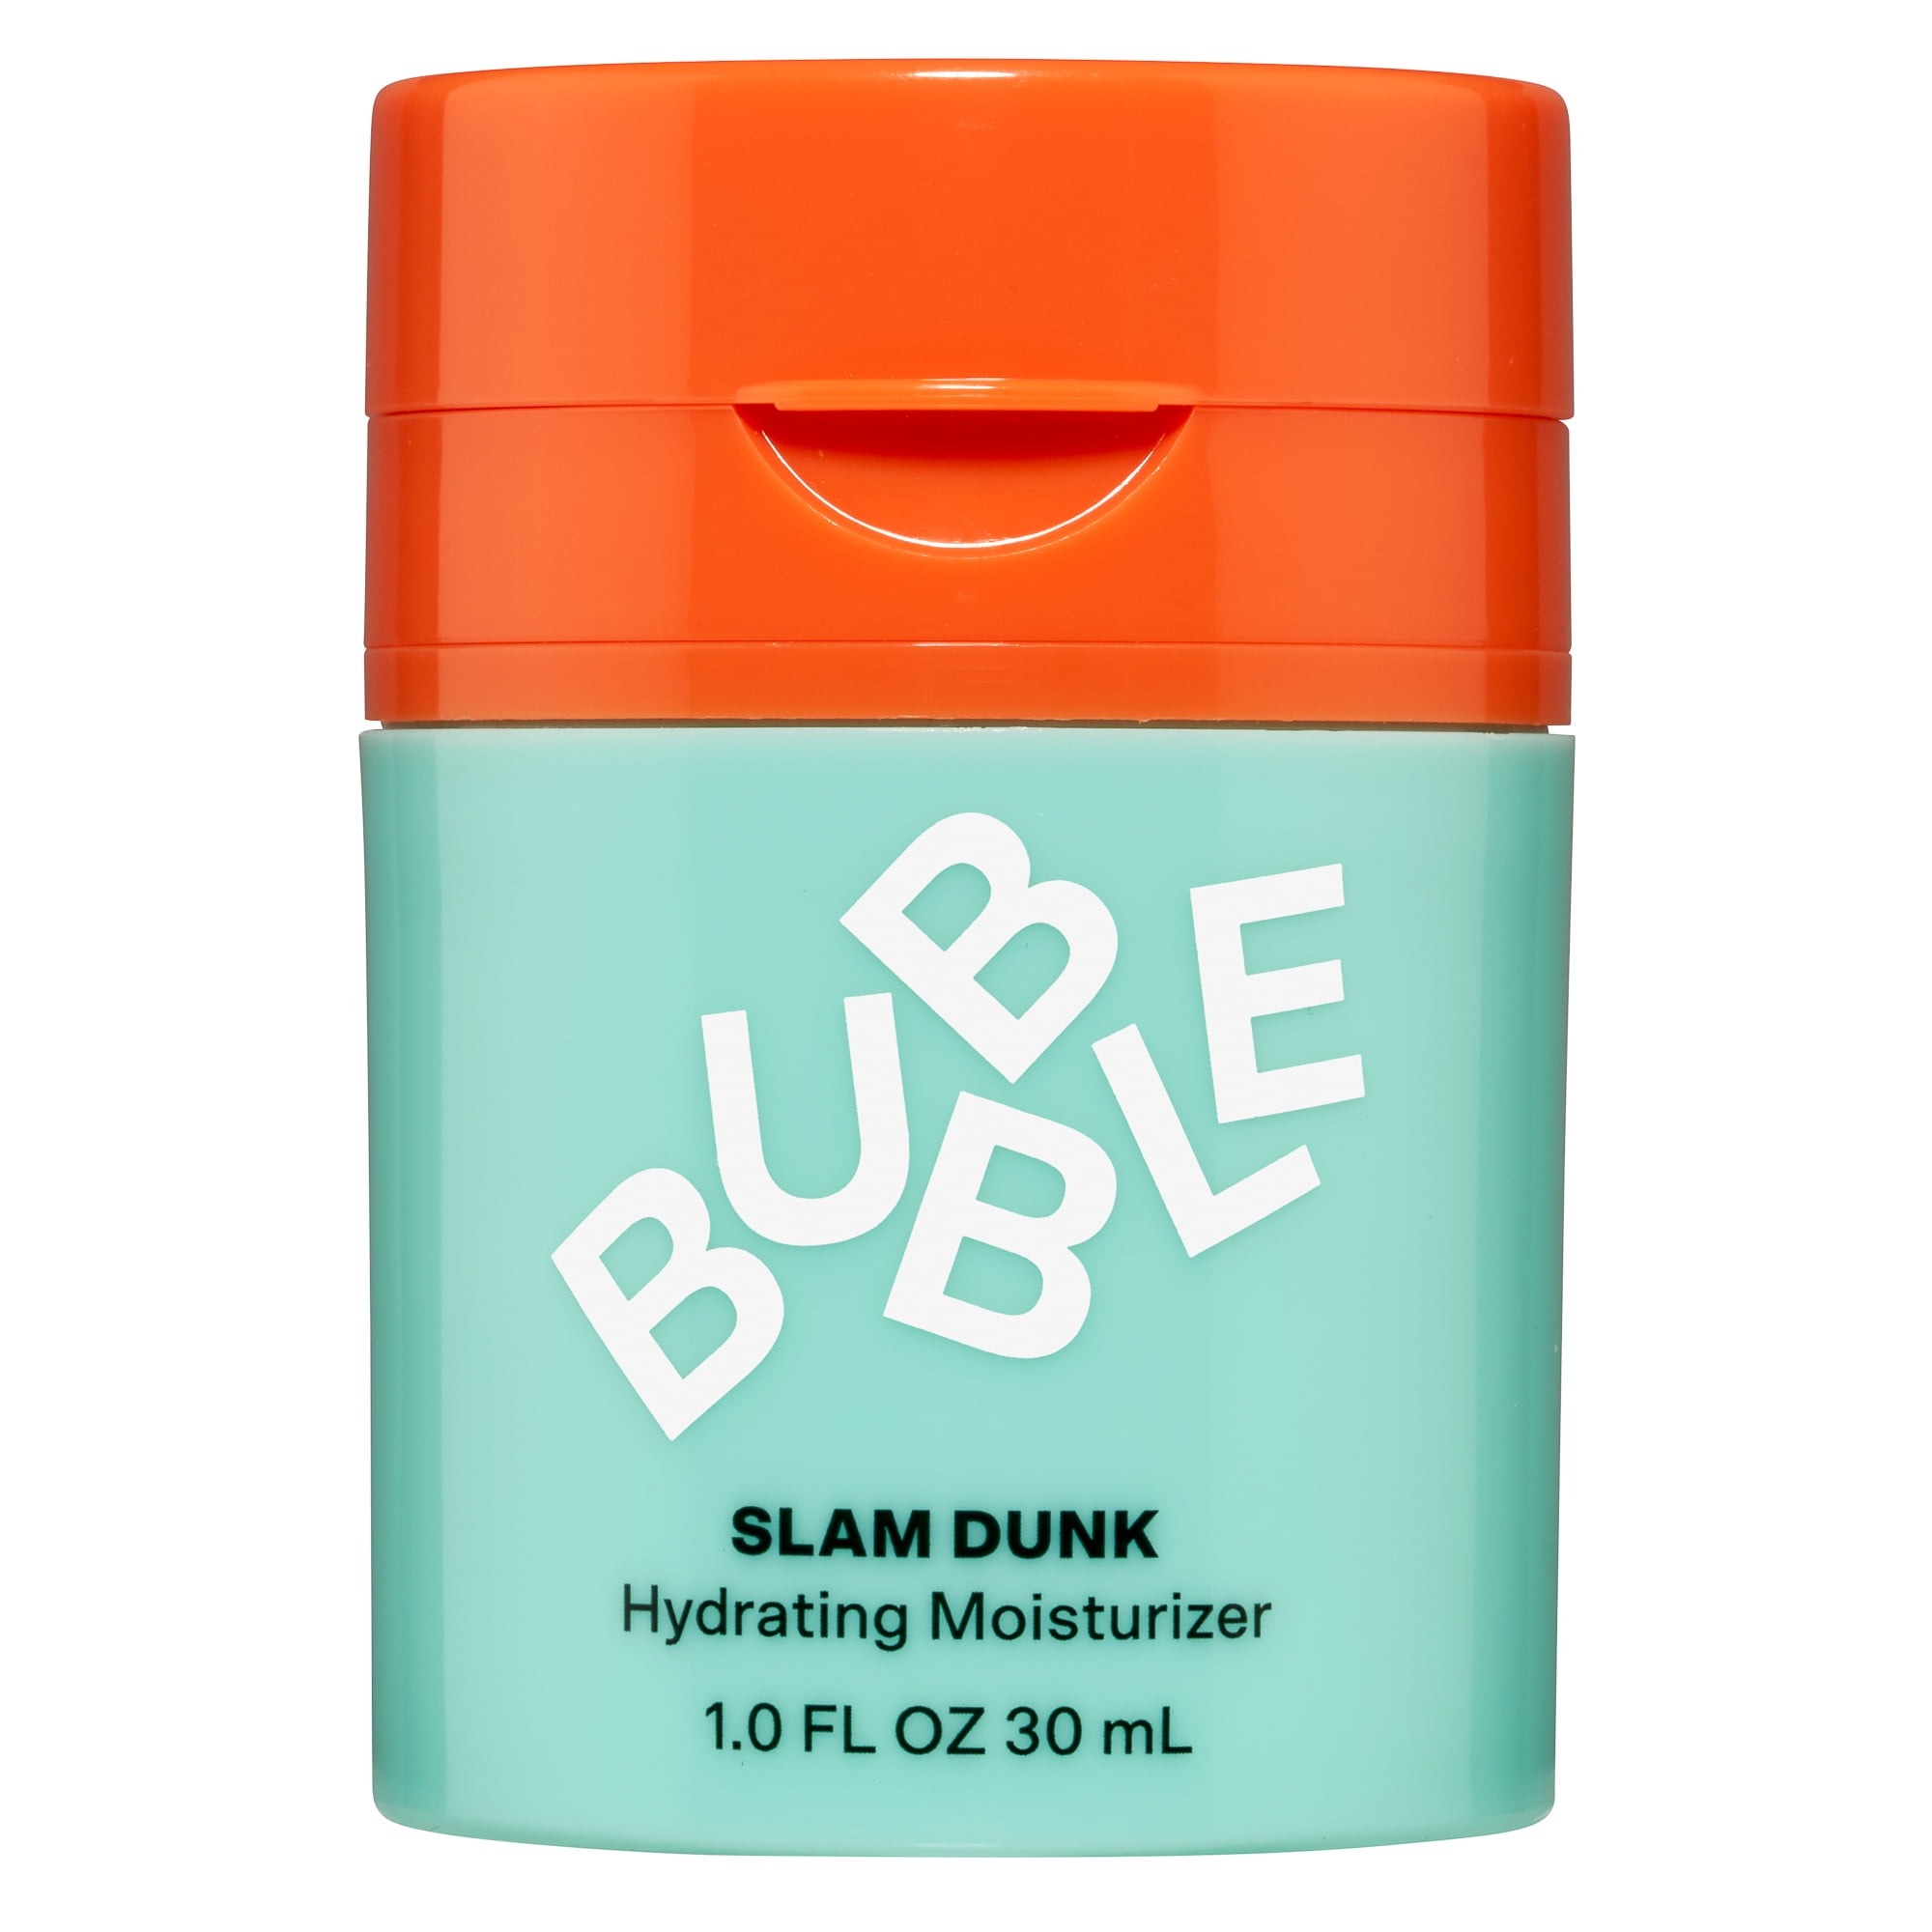 Bubble Skincare Slam Dunk Hydrating Face Moisturizer, For Normal to Dry Skin, 1.0 fl oz, Made with Aloe Leaf Juice, Vitamin E, and Avocado Oil - Walmart.com